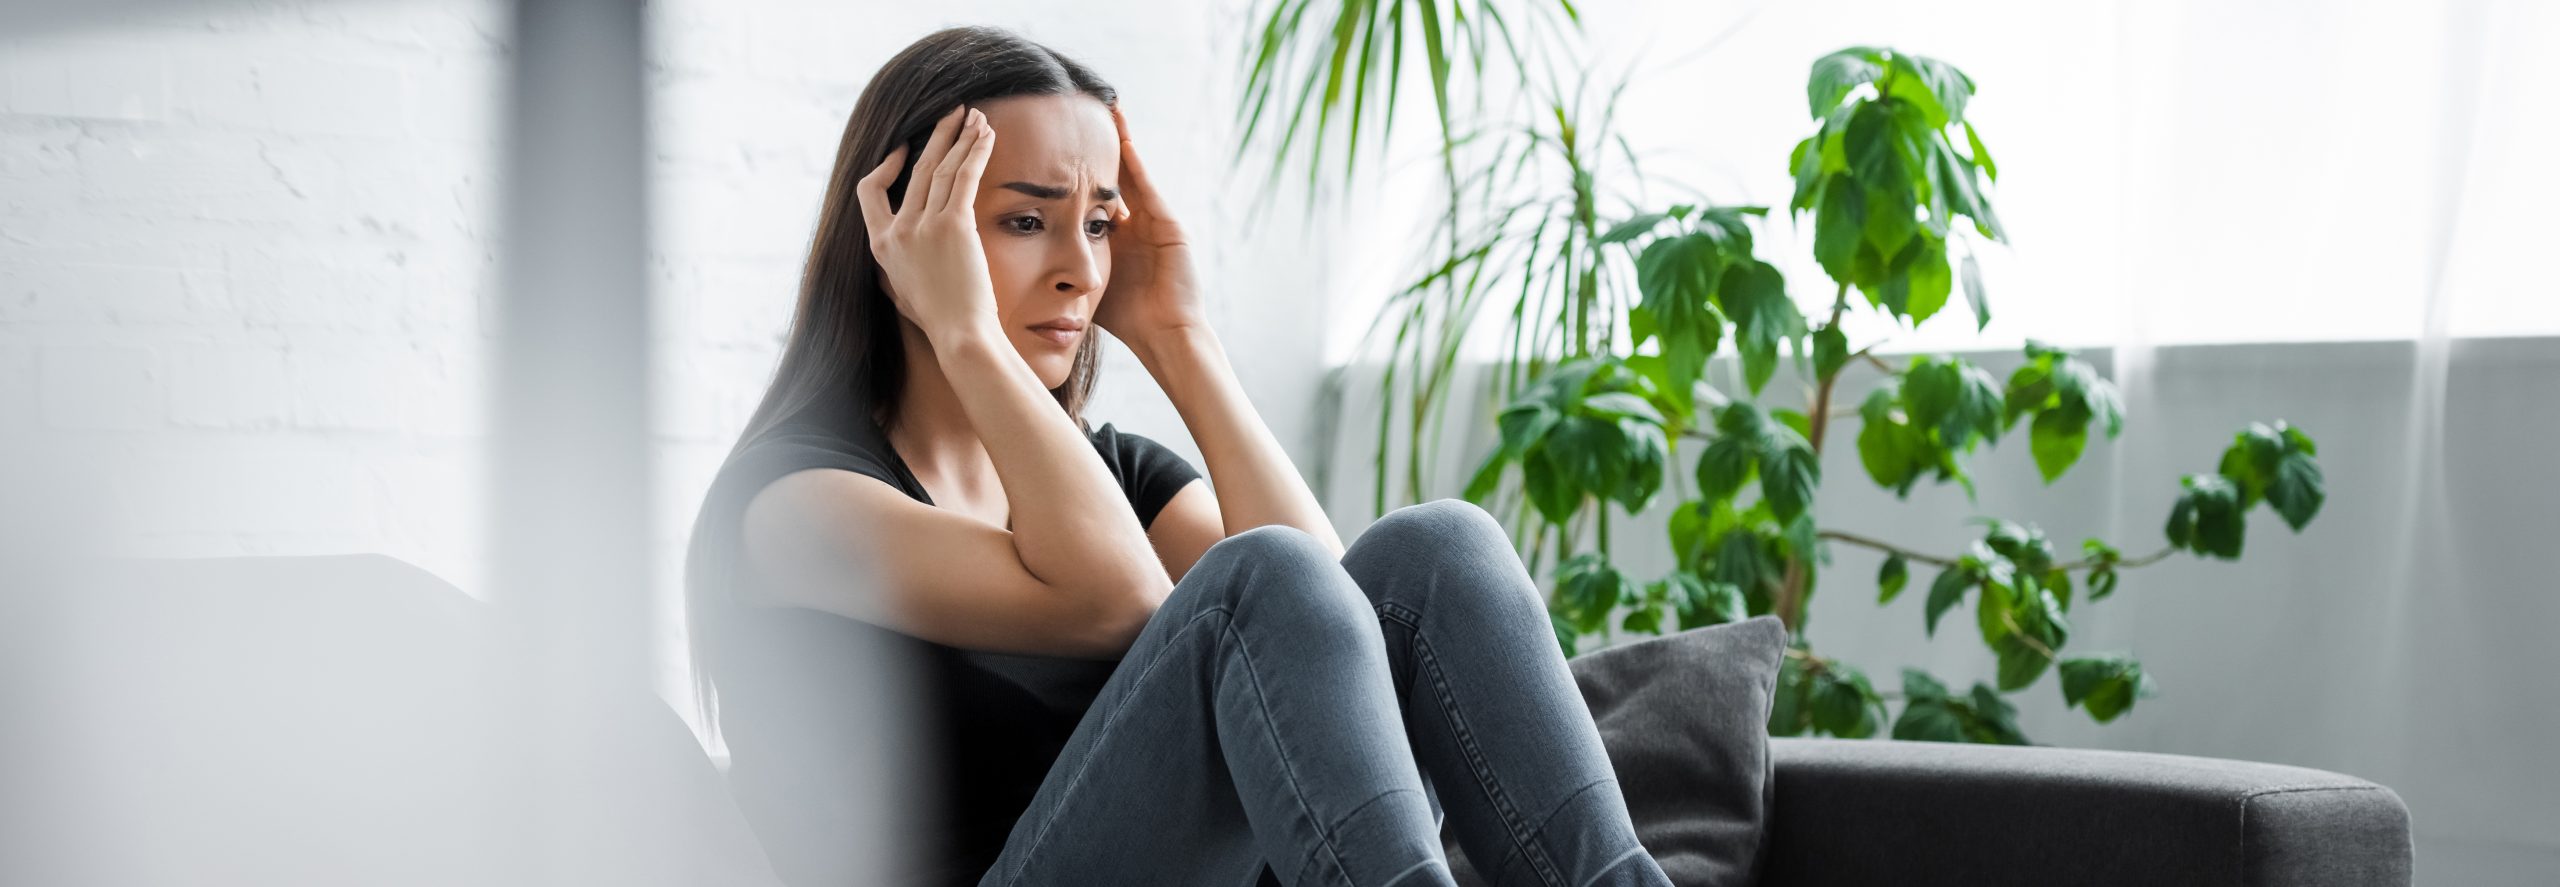 panoramic shot of upset young woman suffering from depression at home